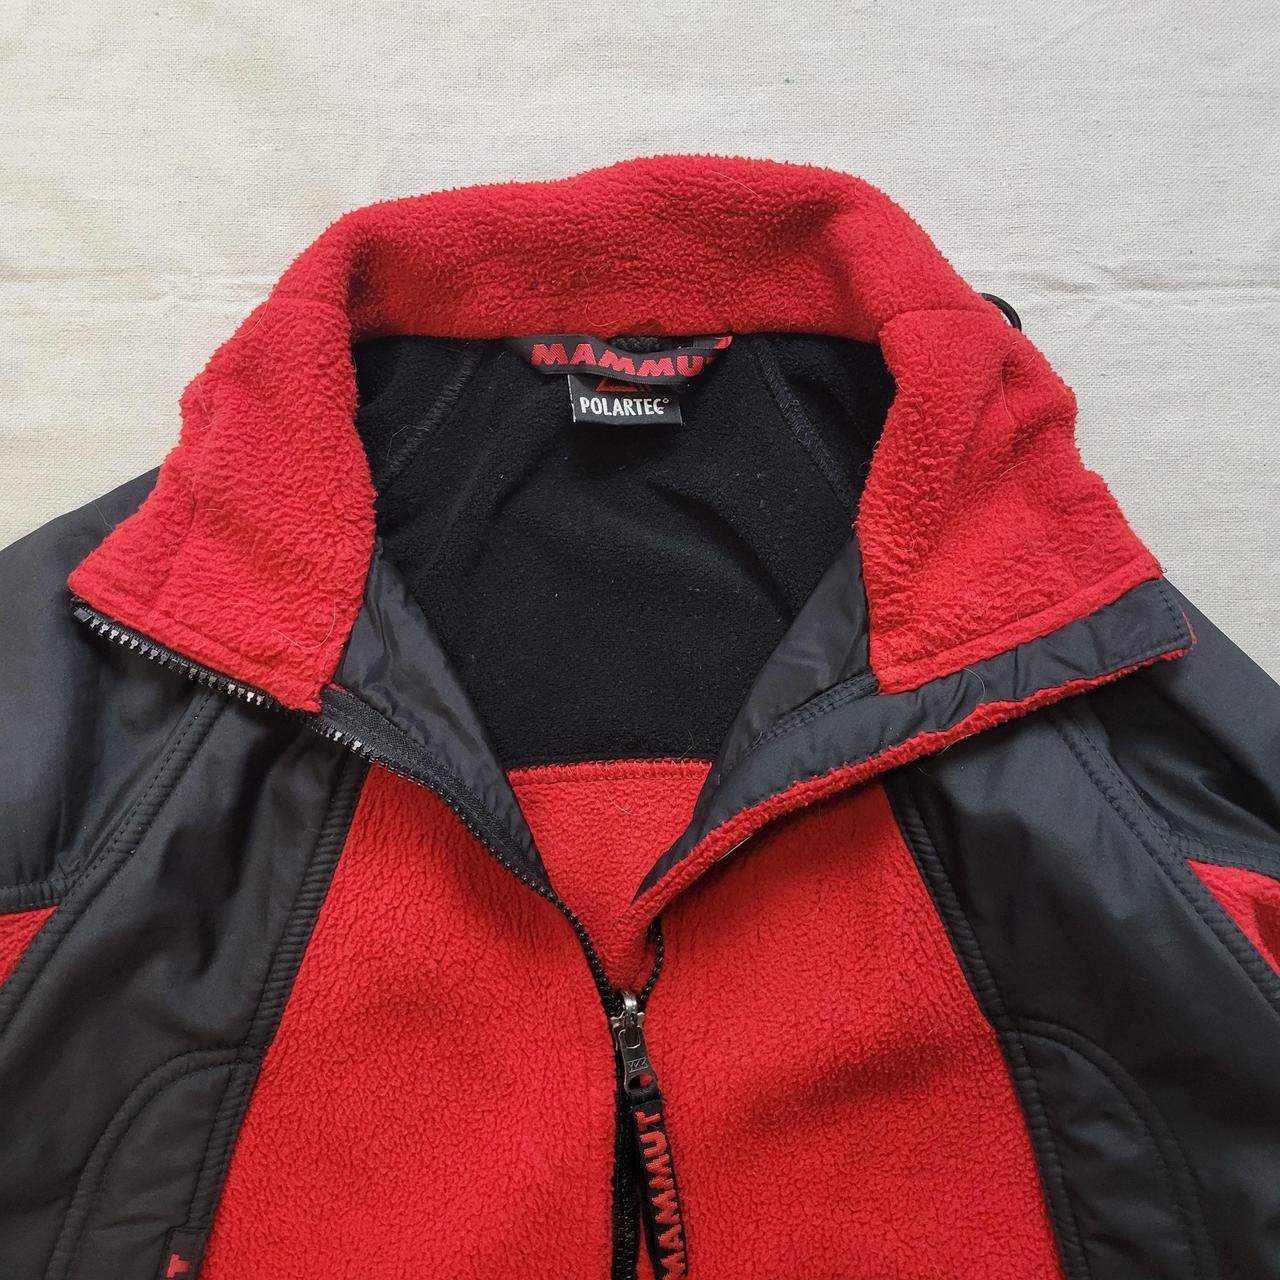 Mammut Men's Red and Black Jacket (2)